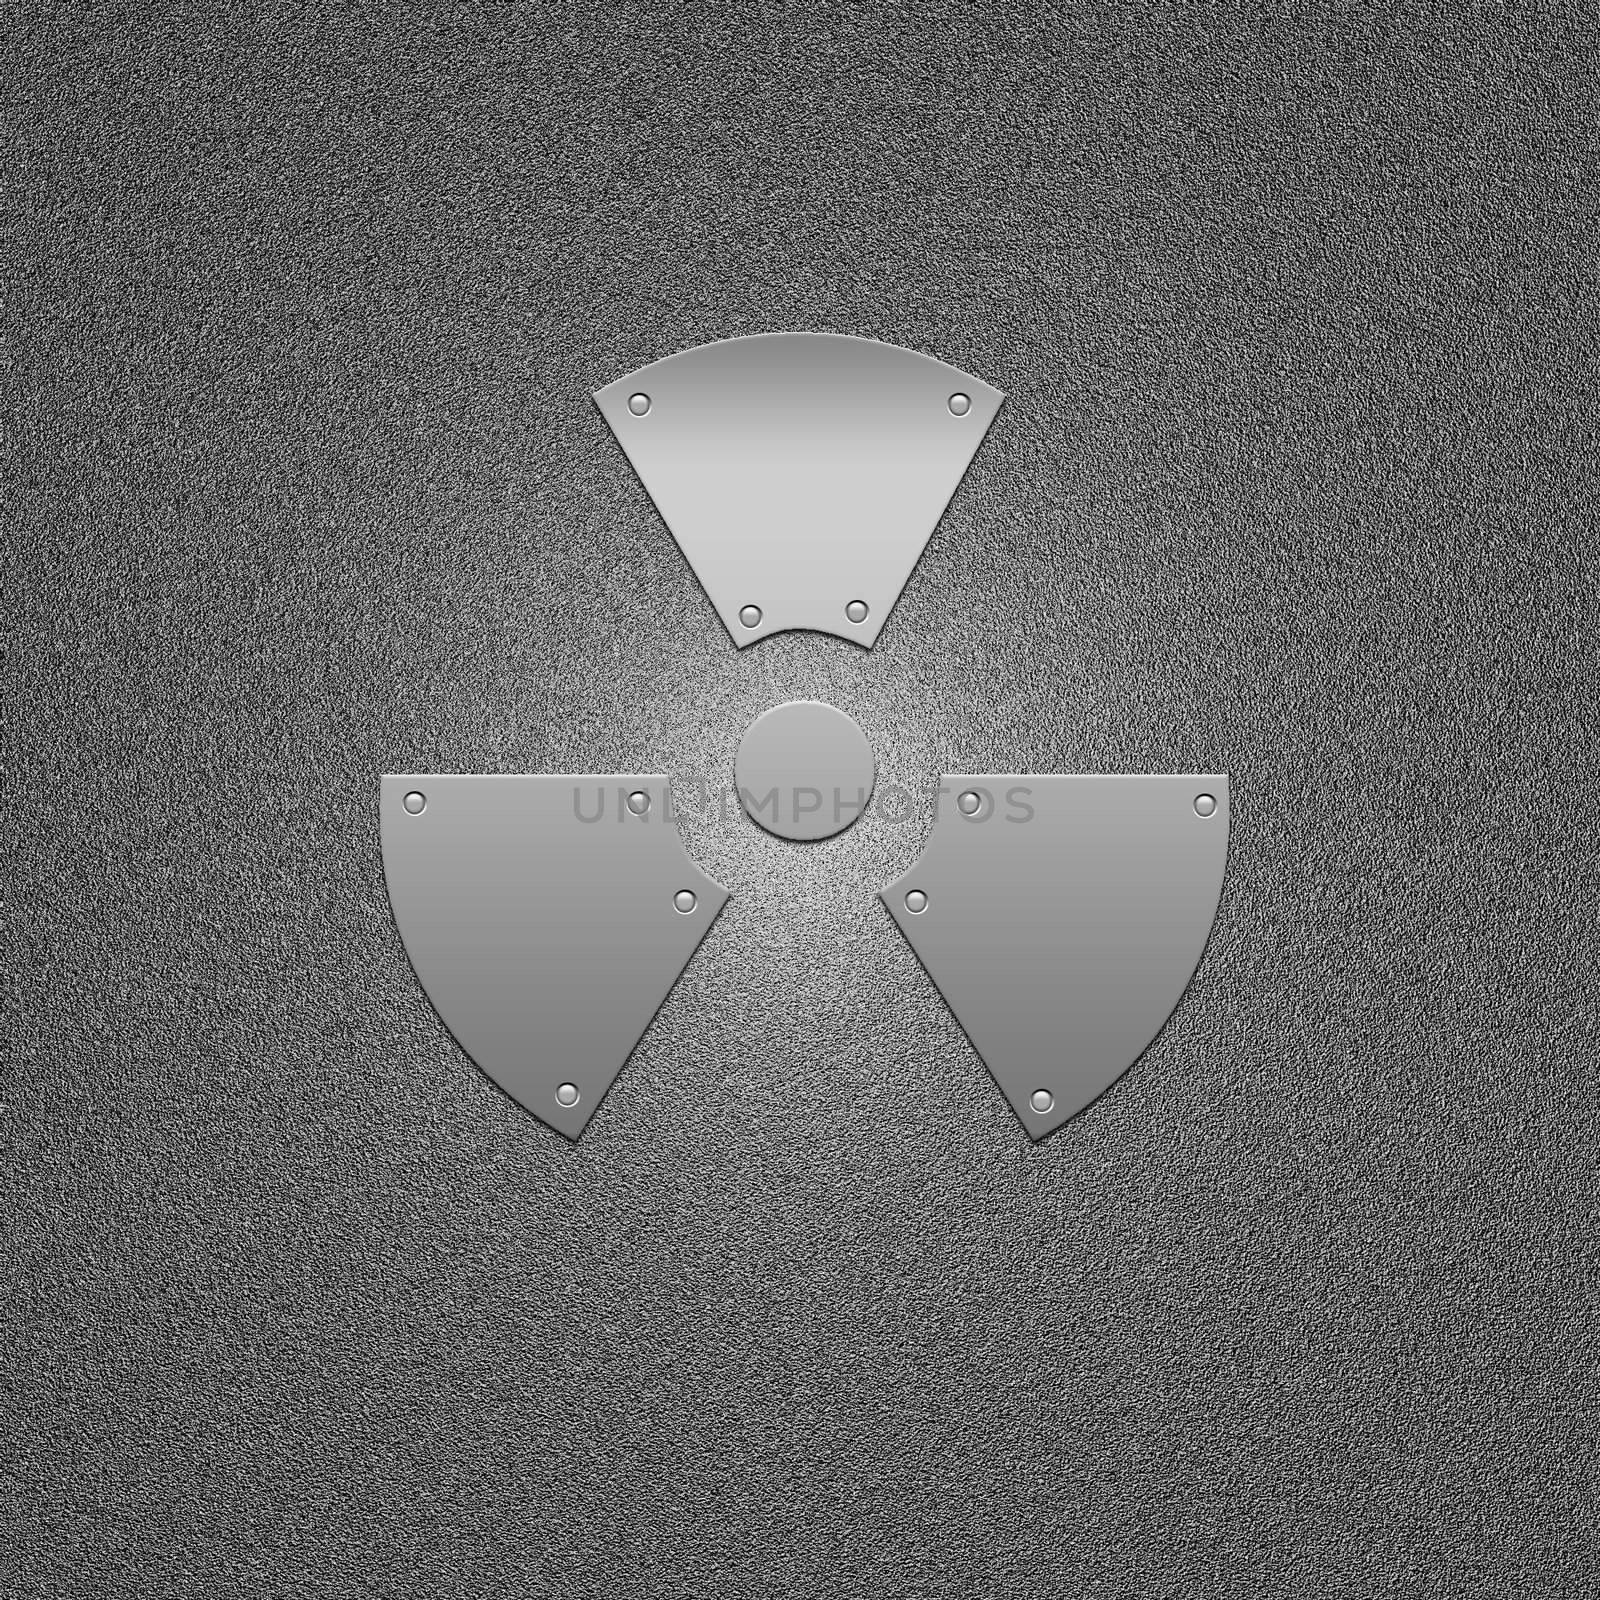 Sign on the prevention of radioactive infection. Threat and danger symbol.